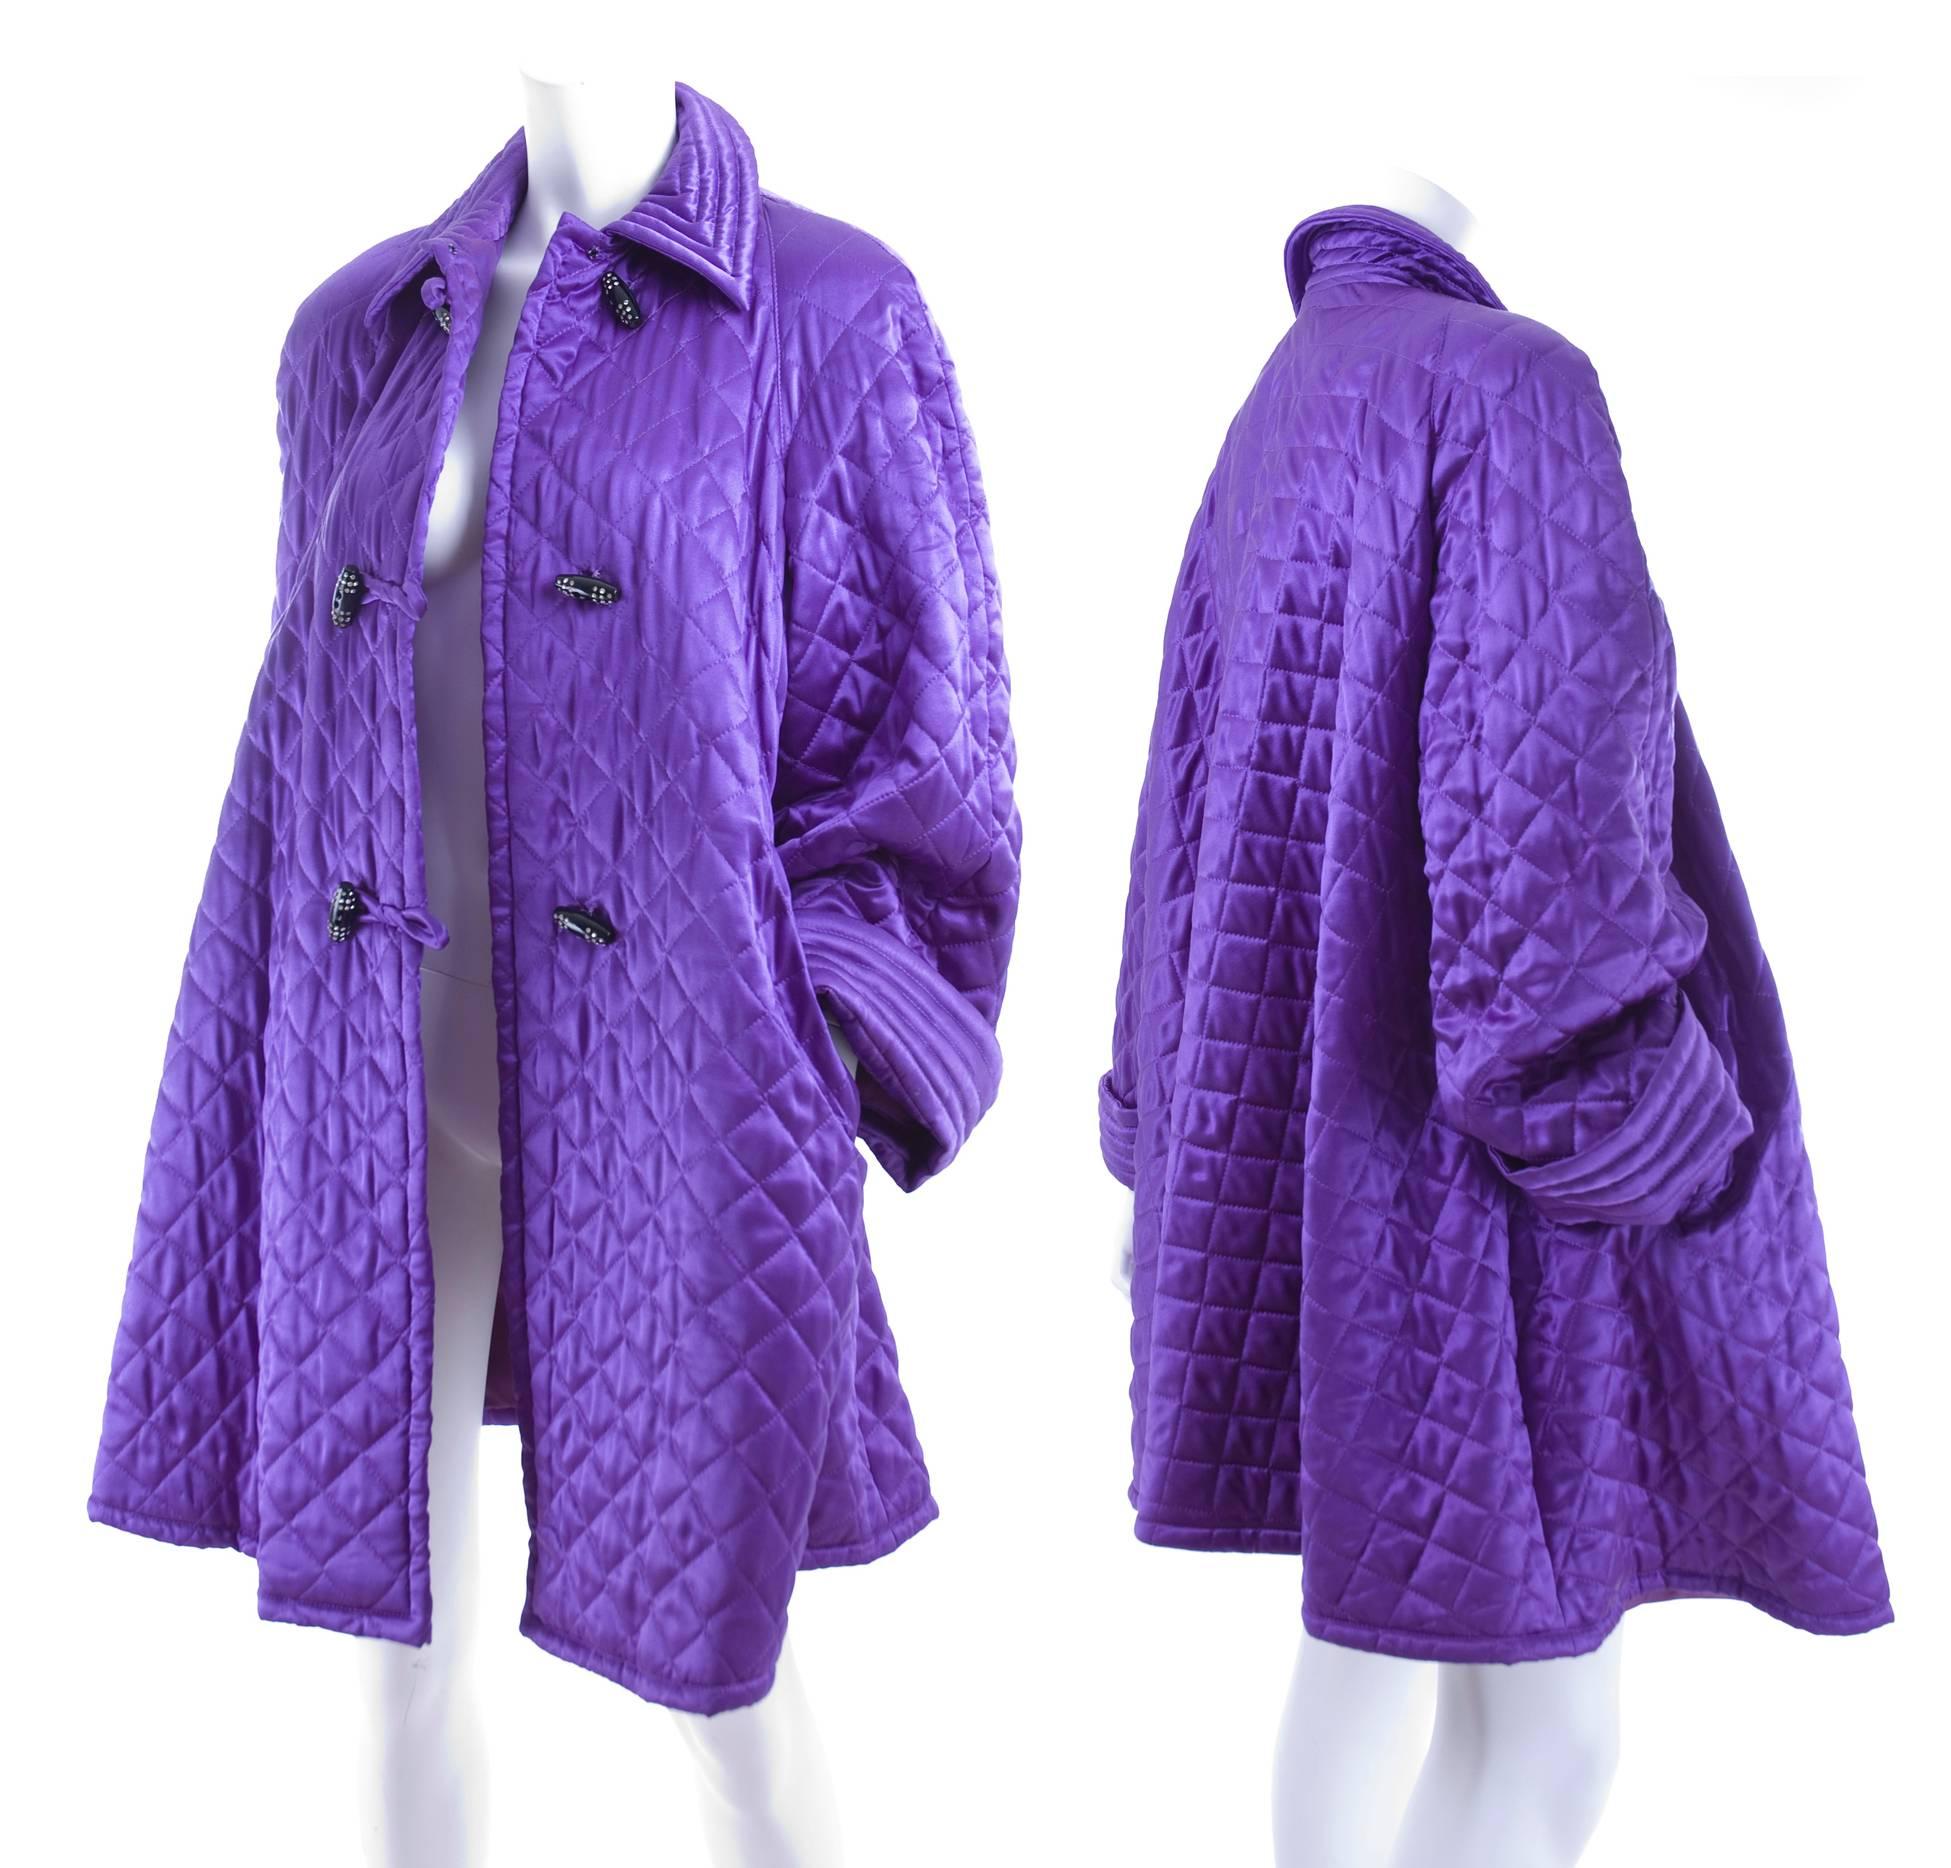 Vintage Valentino quilted silk coat in purple. The coat is lightweight and the toggle buttons are black with rhinestones. 
The size label is EU 38 but I think it is a large. 
Material: 100% Silk 
Excellent condition.
Measurements:
Length 34 - bust